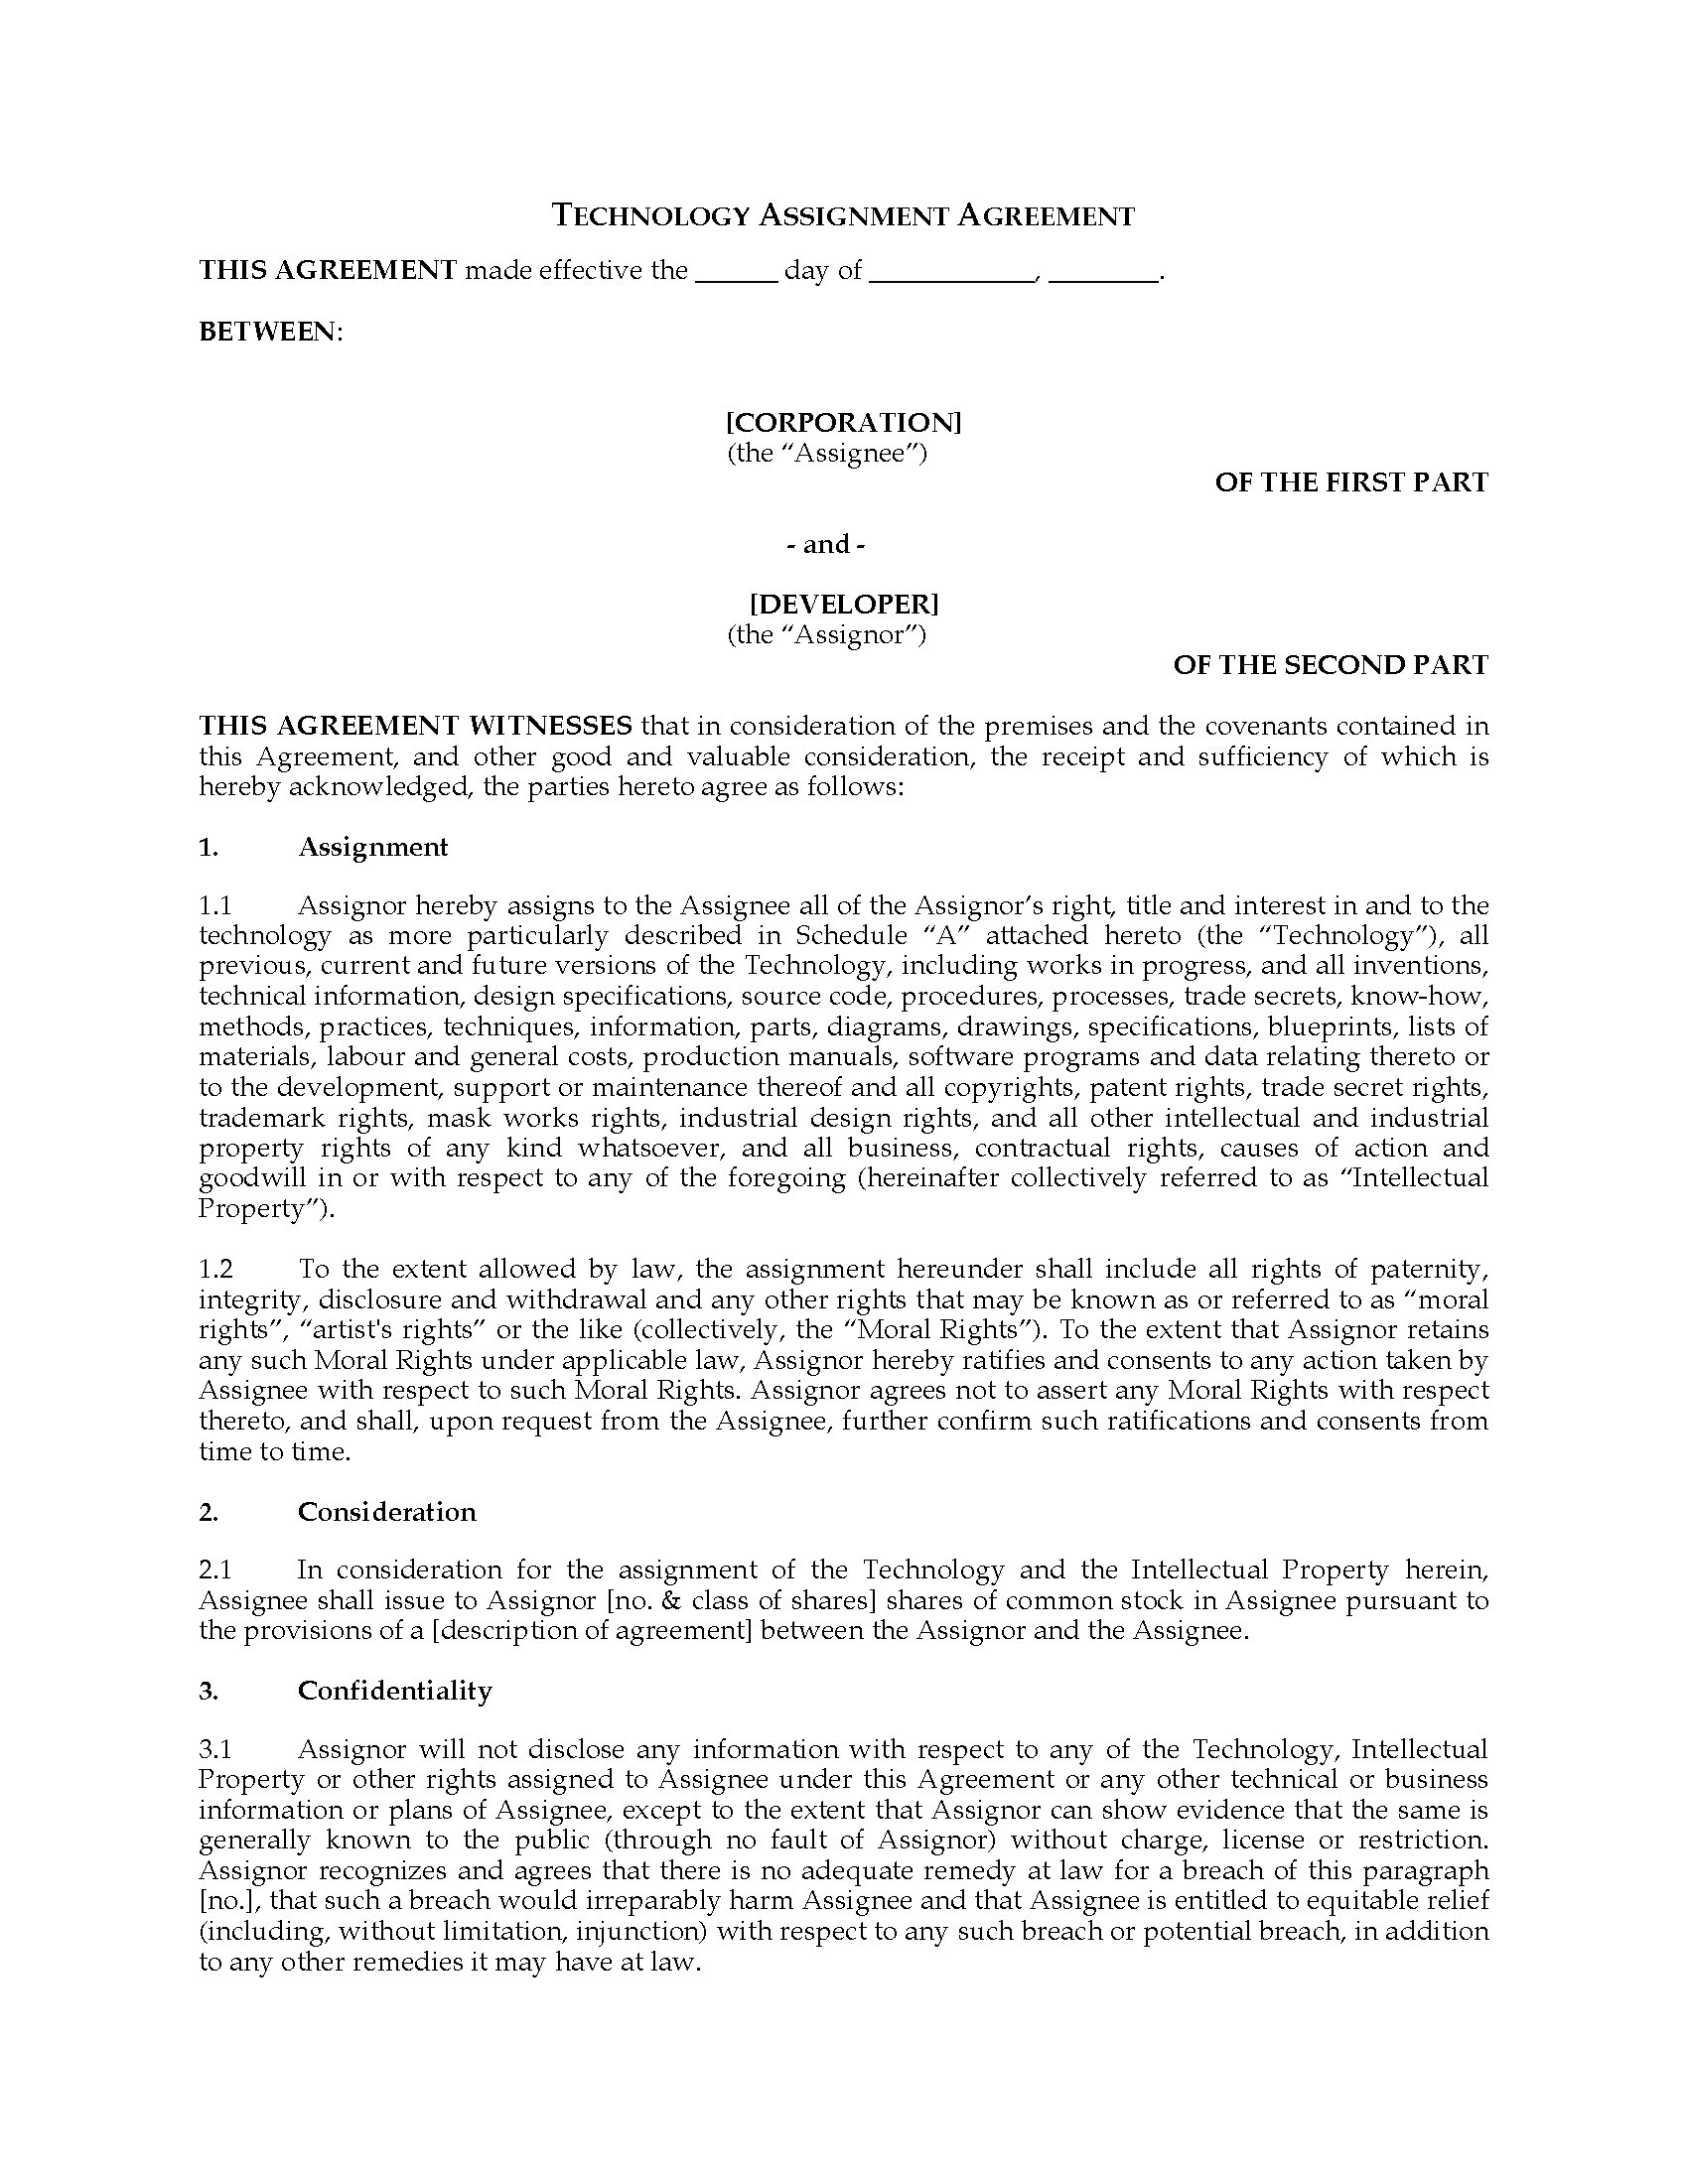 assignment of technology agreement